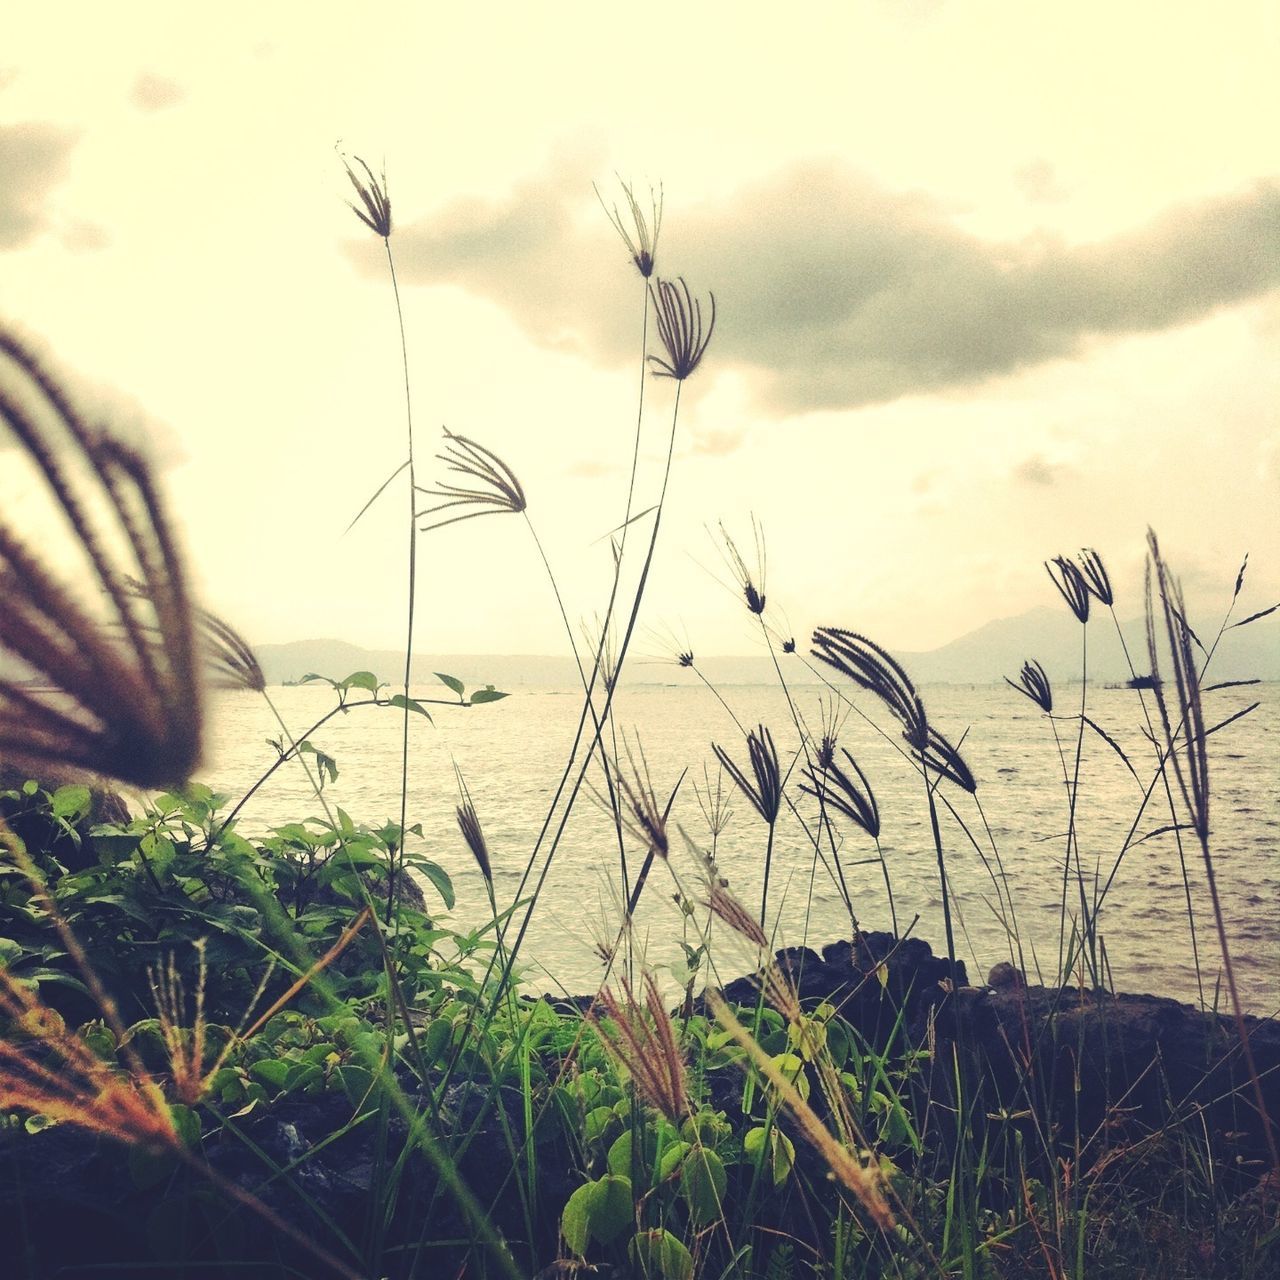 plant, sky, beach, nature, growth, tranquility, water, beauty in nature, grass, stem, tranquil scene, sunset, sea, sand, scenics, shore, horizon over water, focus on foreground, growing, outdoors